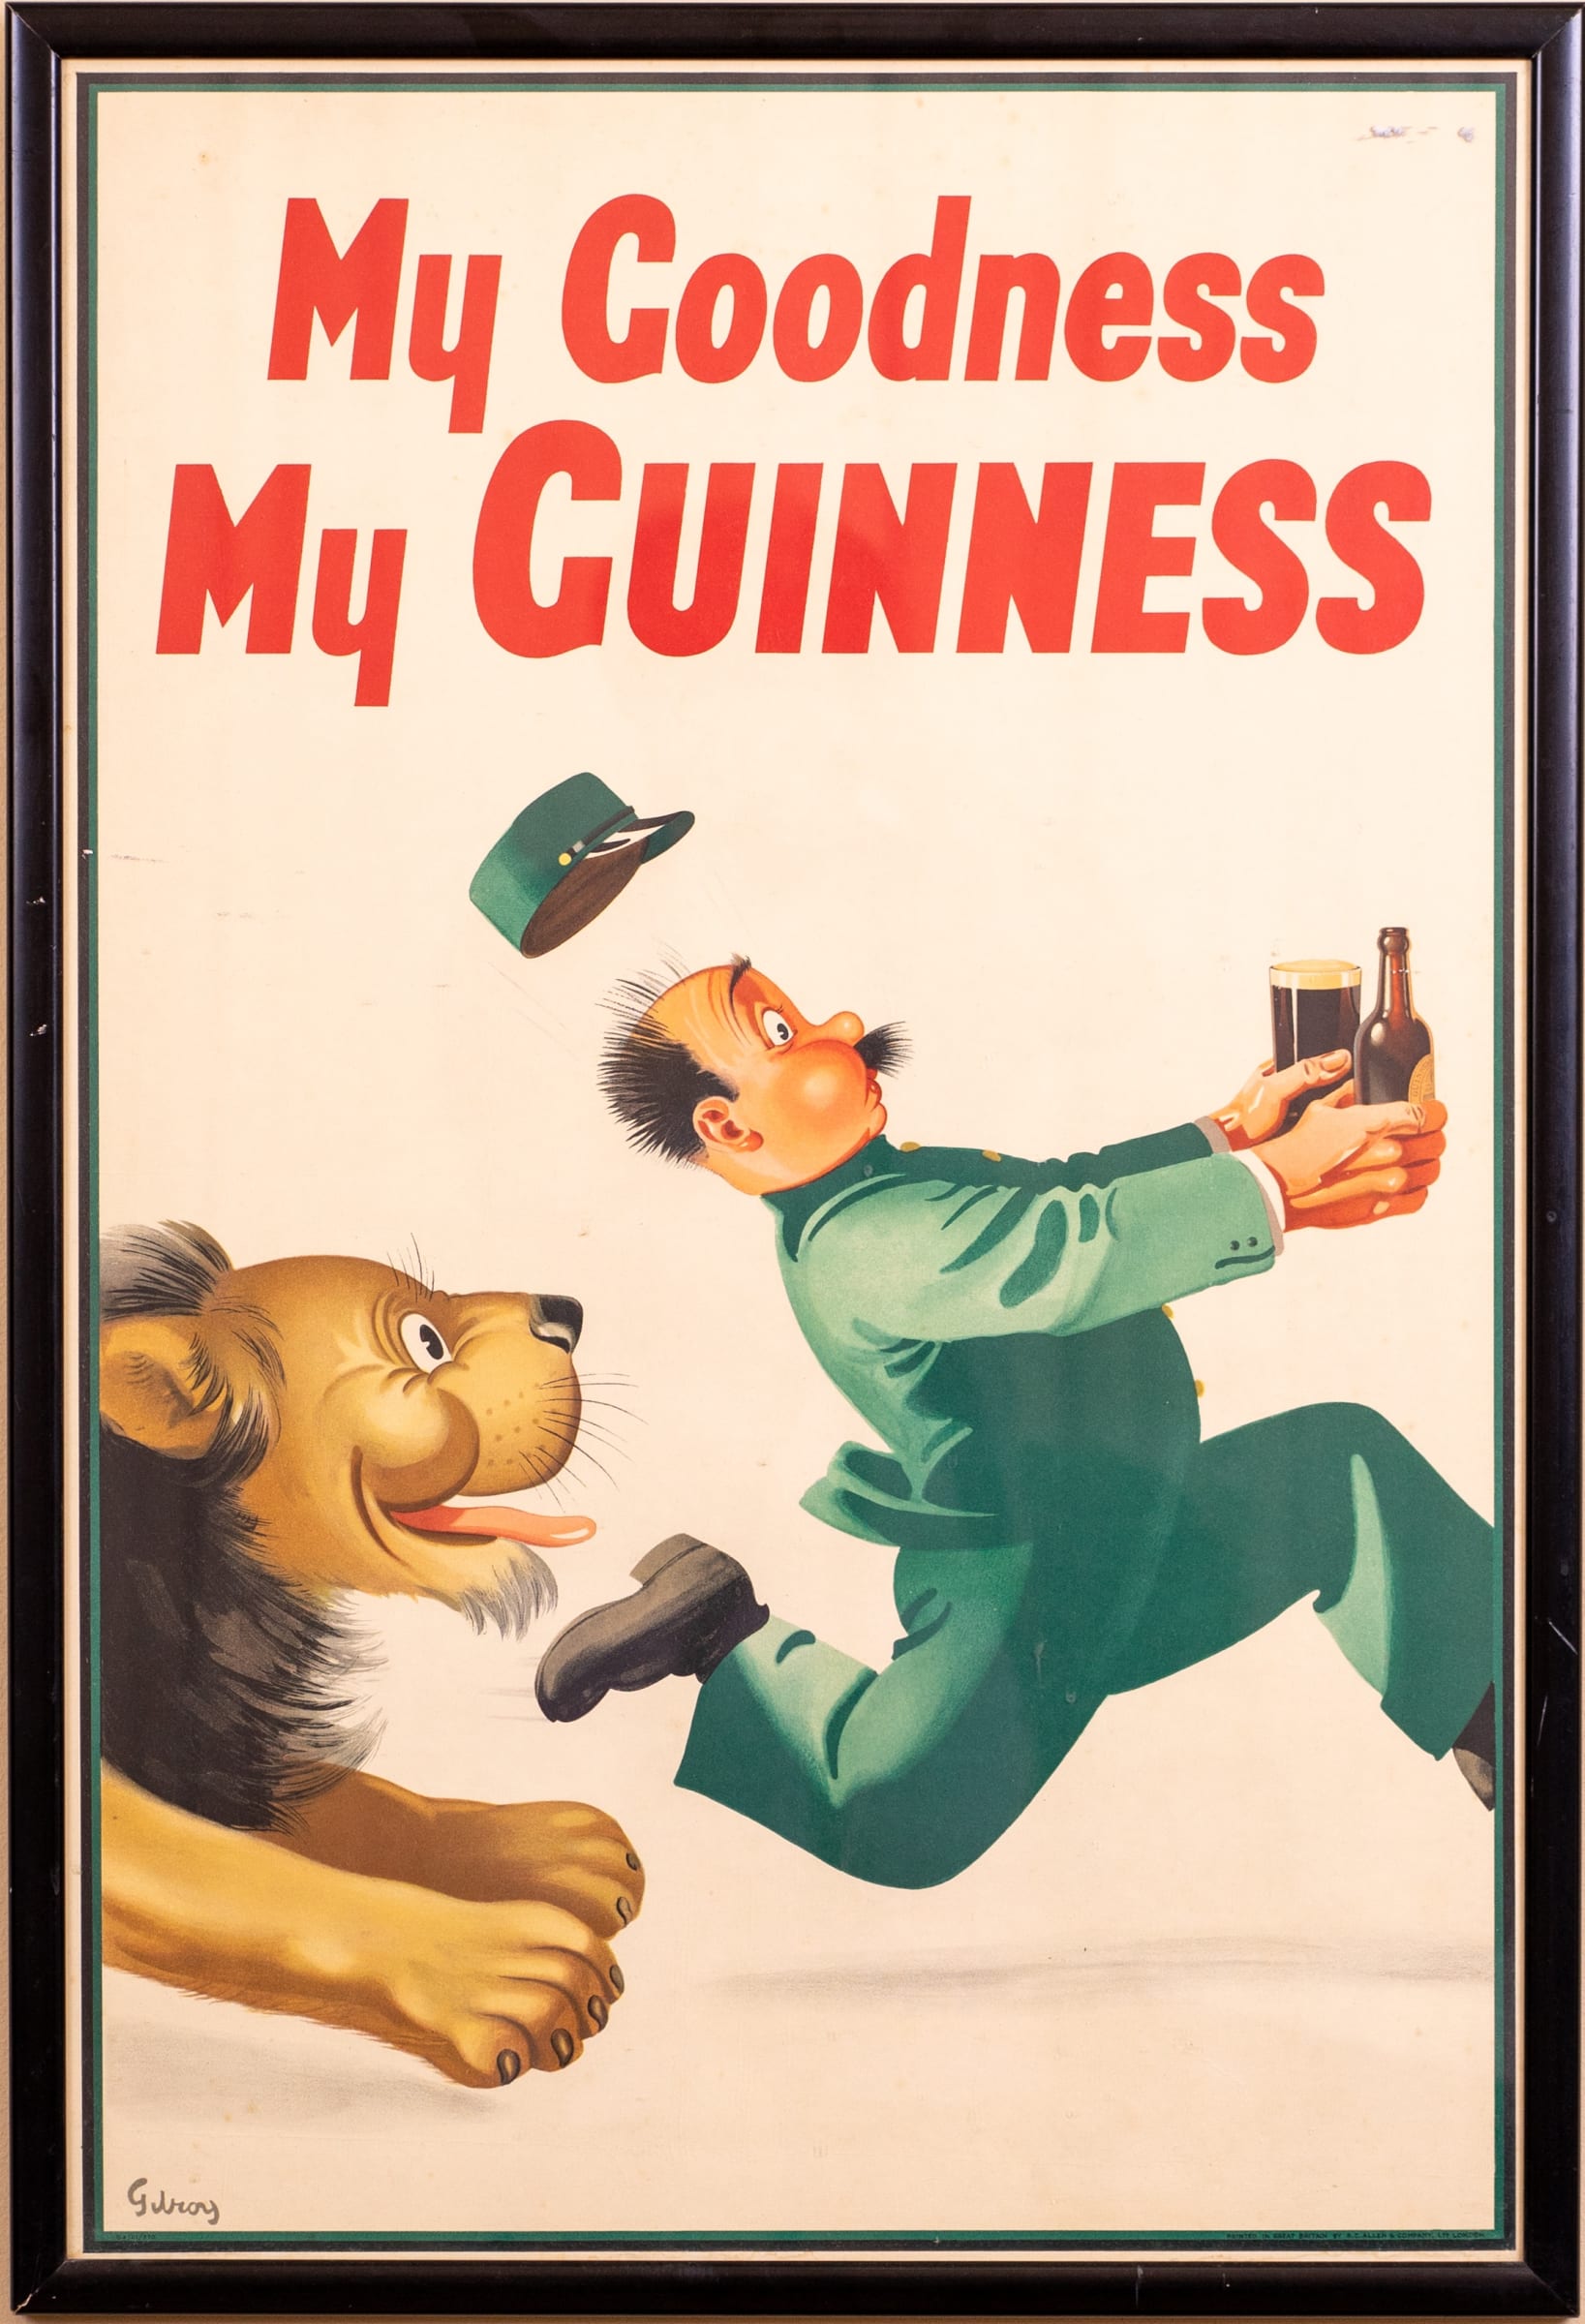 Vintage Guinness Animals at Edinburgh Zoo Advertisement Poster Print A3/A4